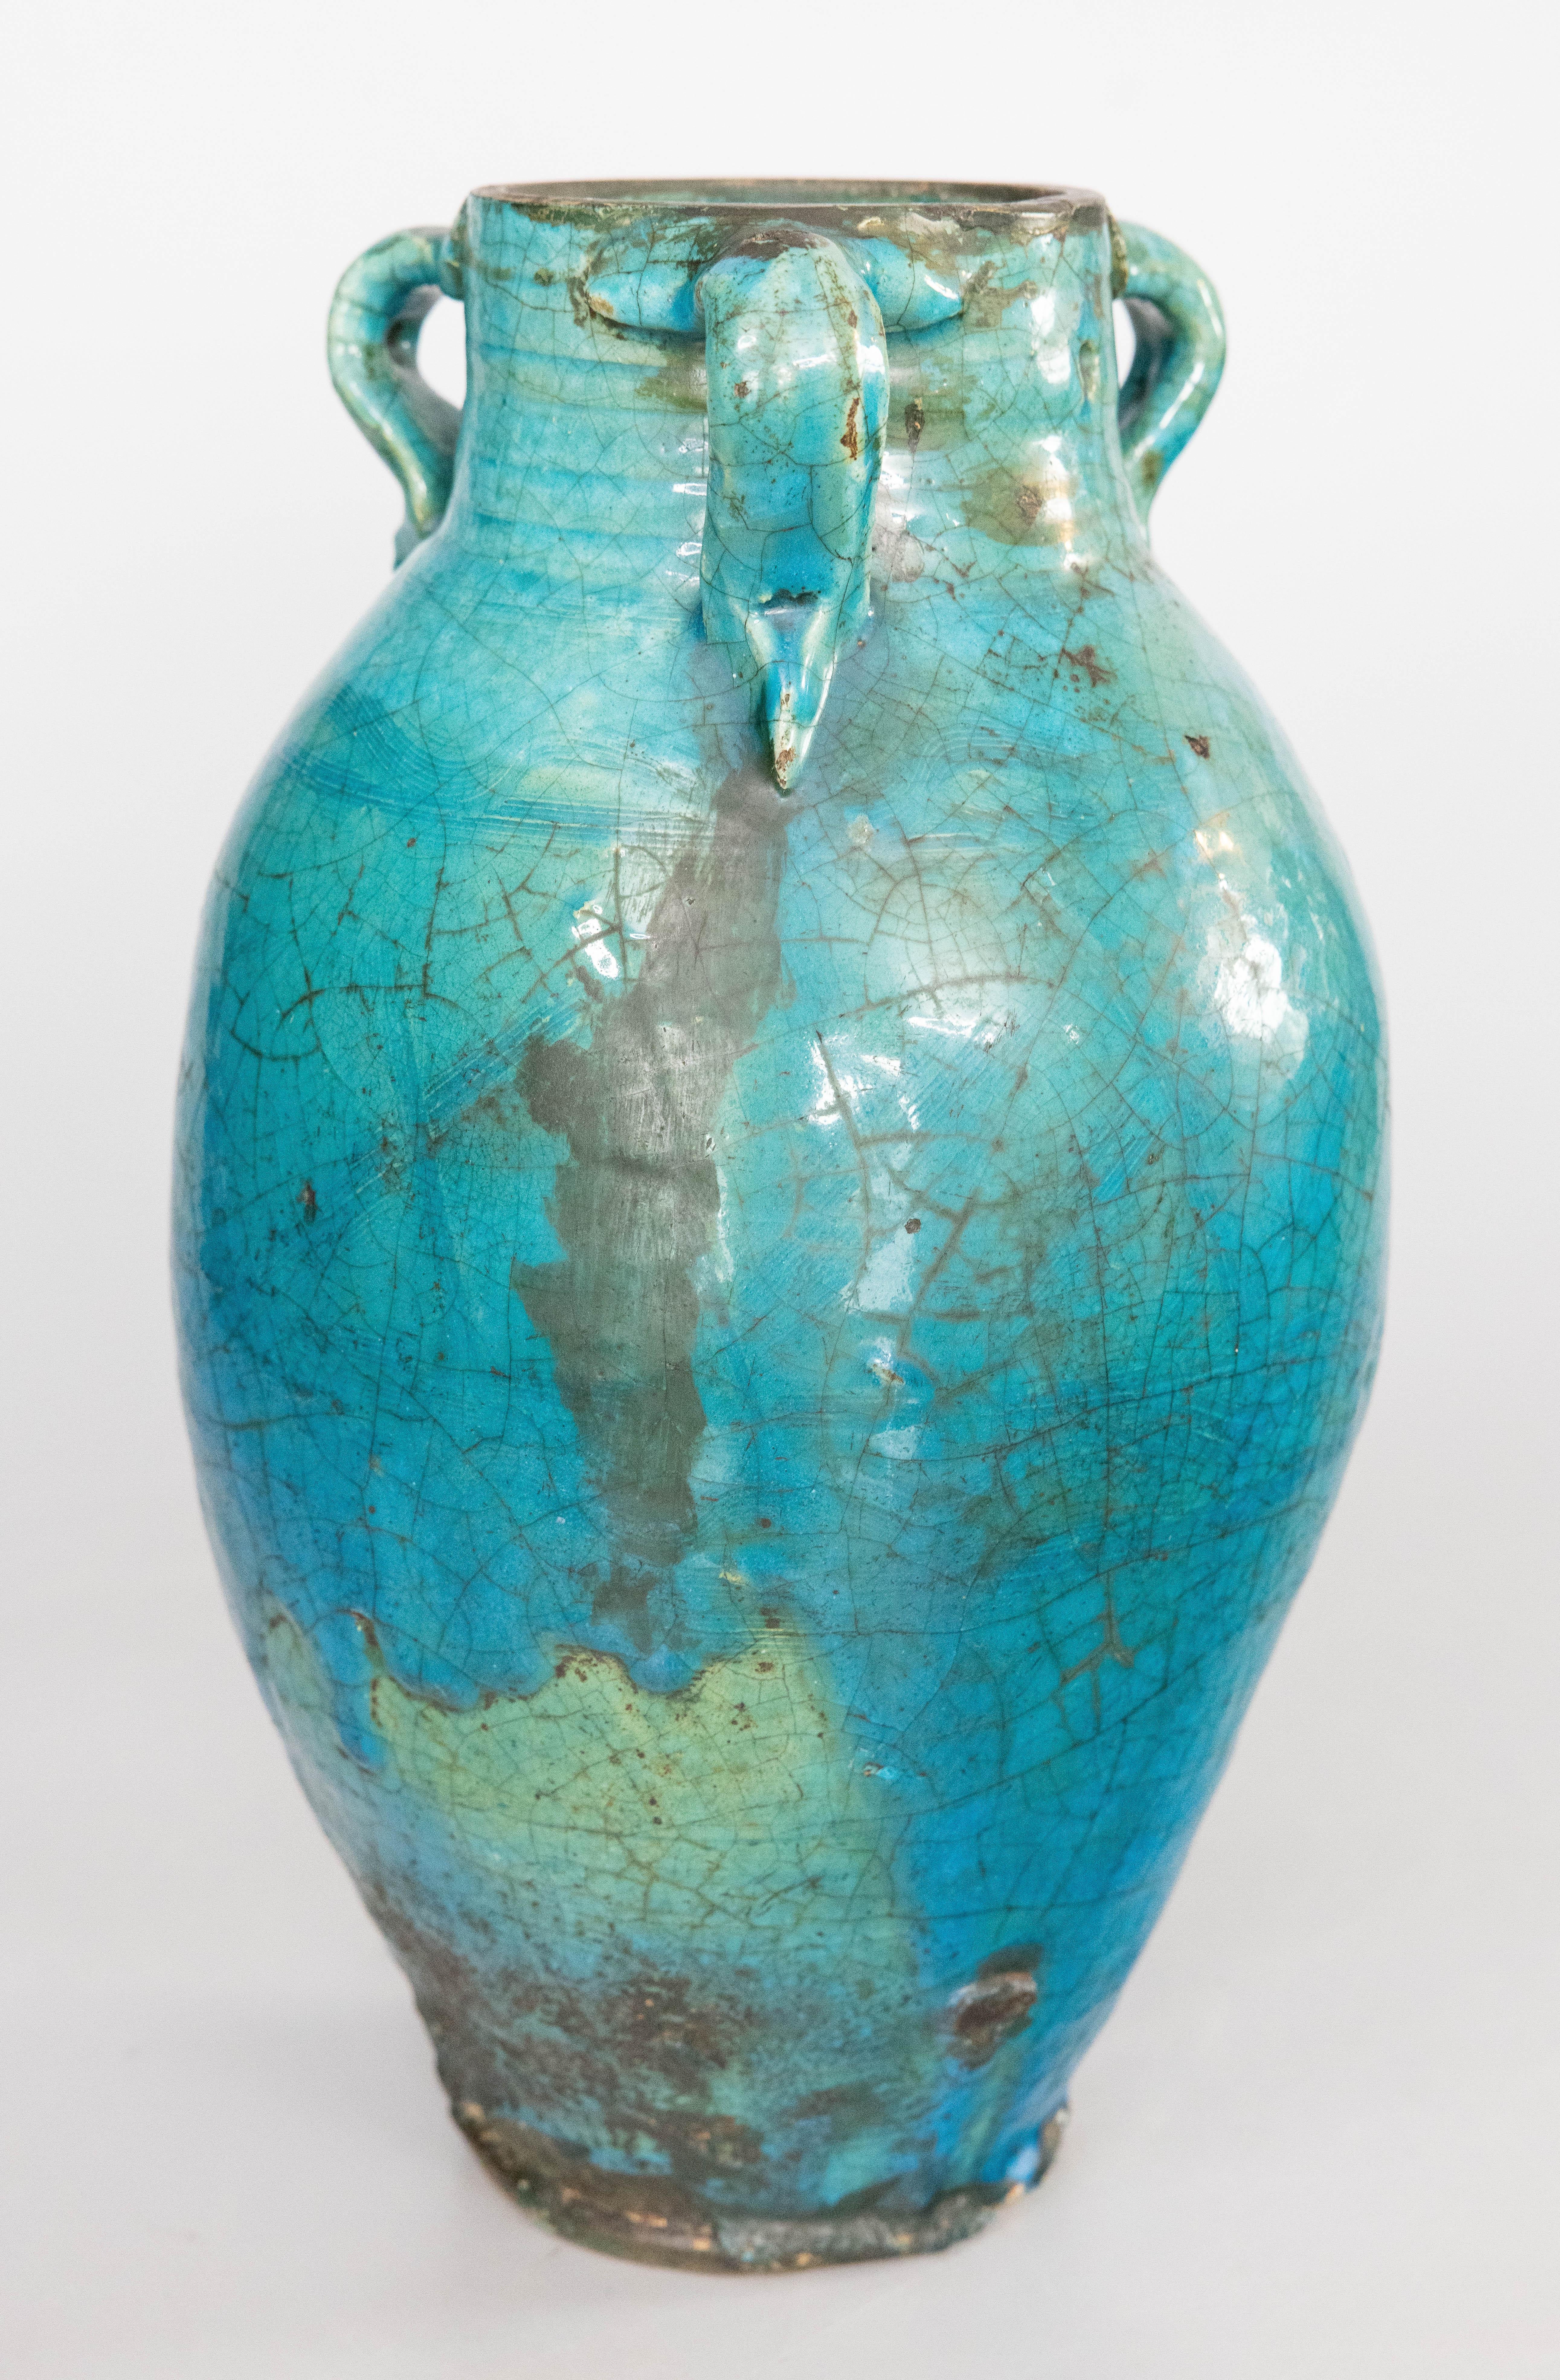 An exceptional antique French turquoise / teal / blue green glazed terracotta vase, urn, or olive jar with handles, circa 1850. This is the statement piece you've been looking for! This beautiful vase is a nice large size and heavy, weighing a